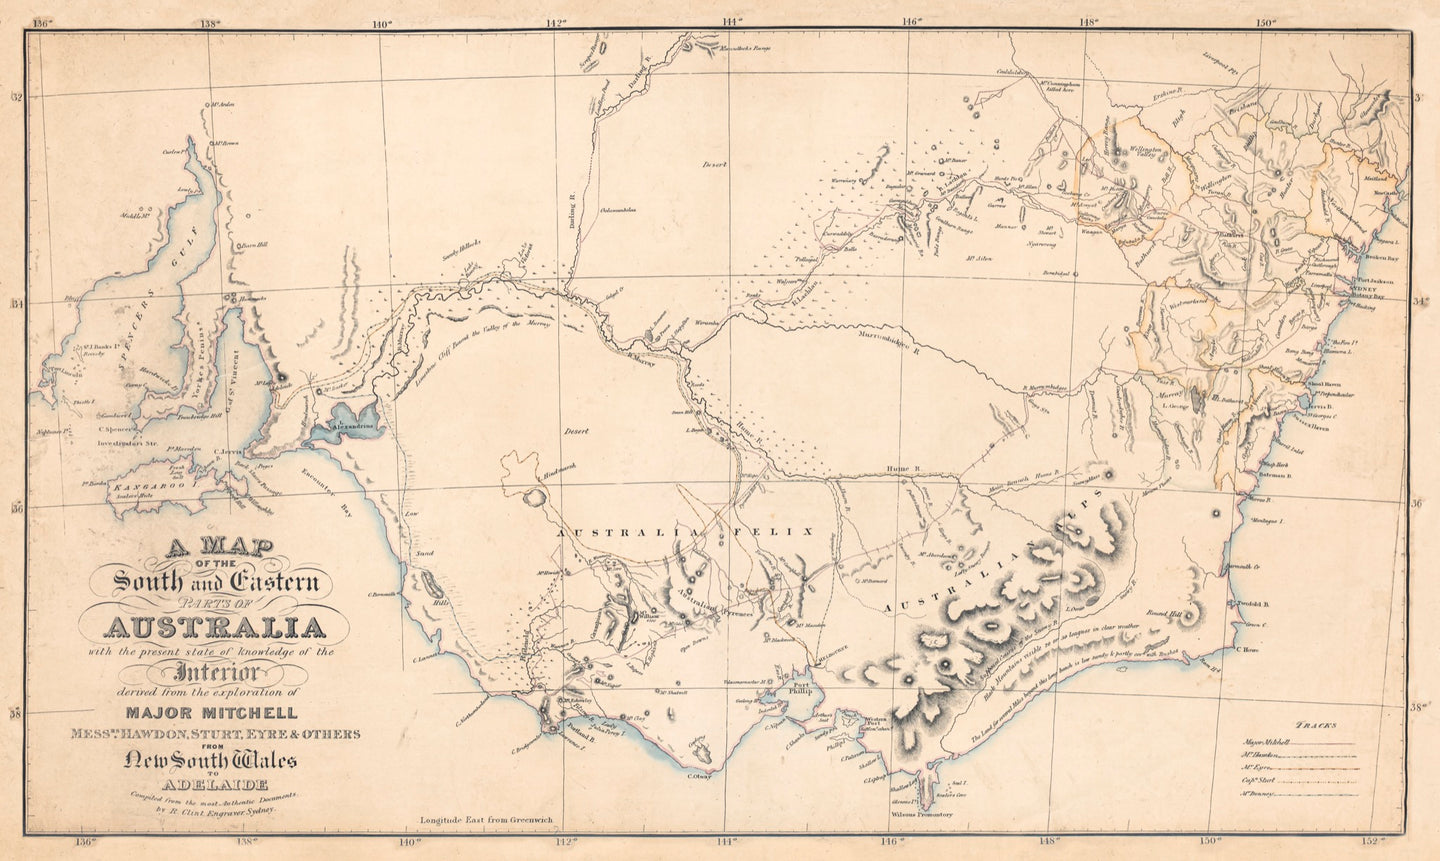 A Map of the South and Eastern parts of Australia... derived from the exploration of Major Mitchell, Hawdon, Sturt, Eyre et al..., 1839